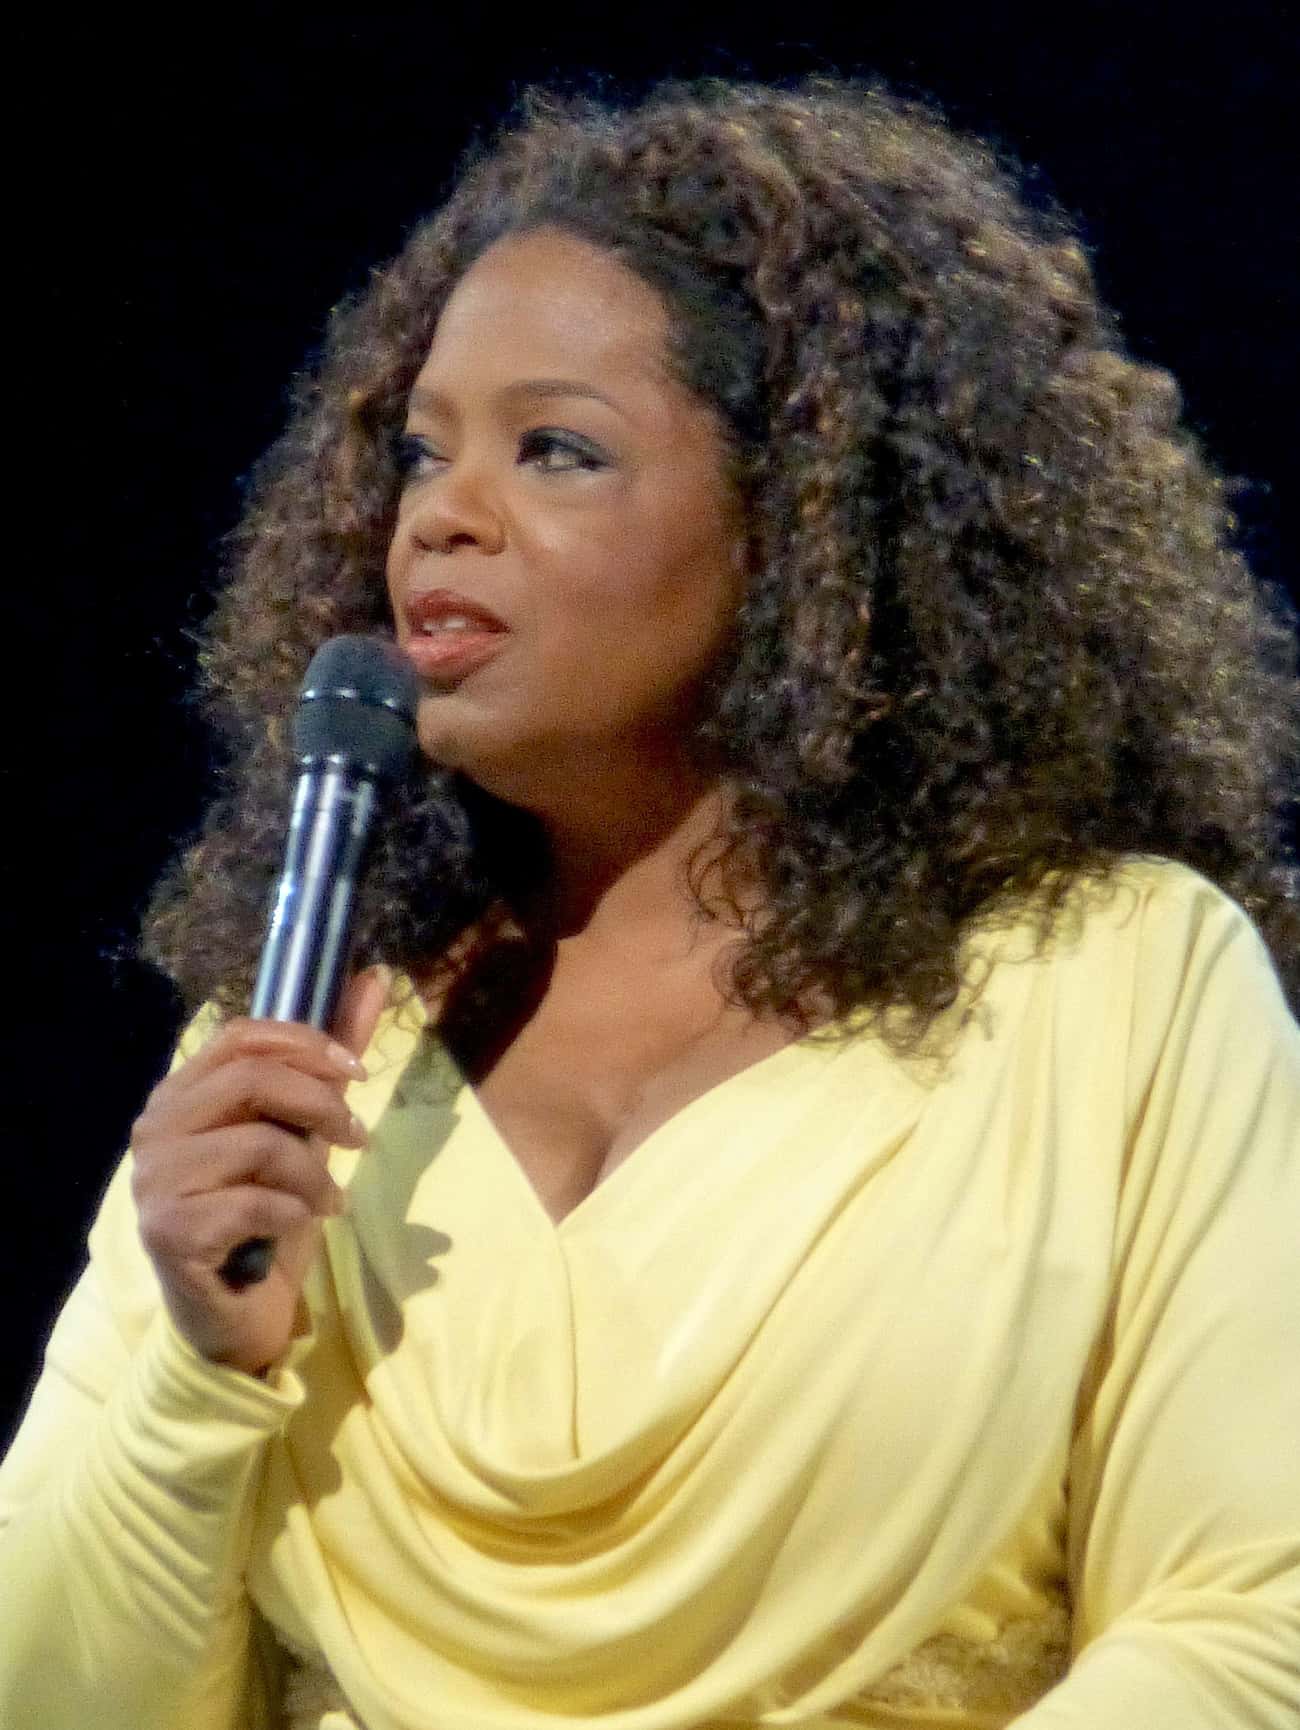 She Said Oprah Had A Hand In Stalling Her Career